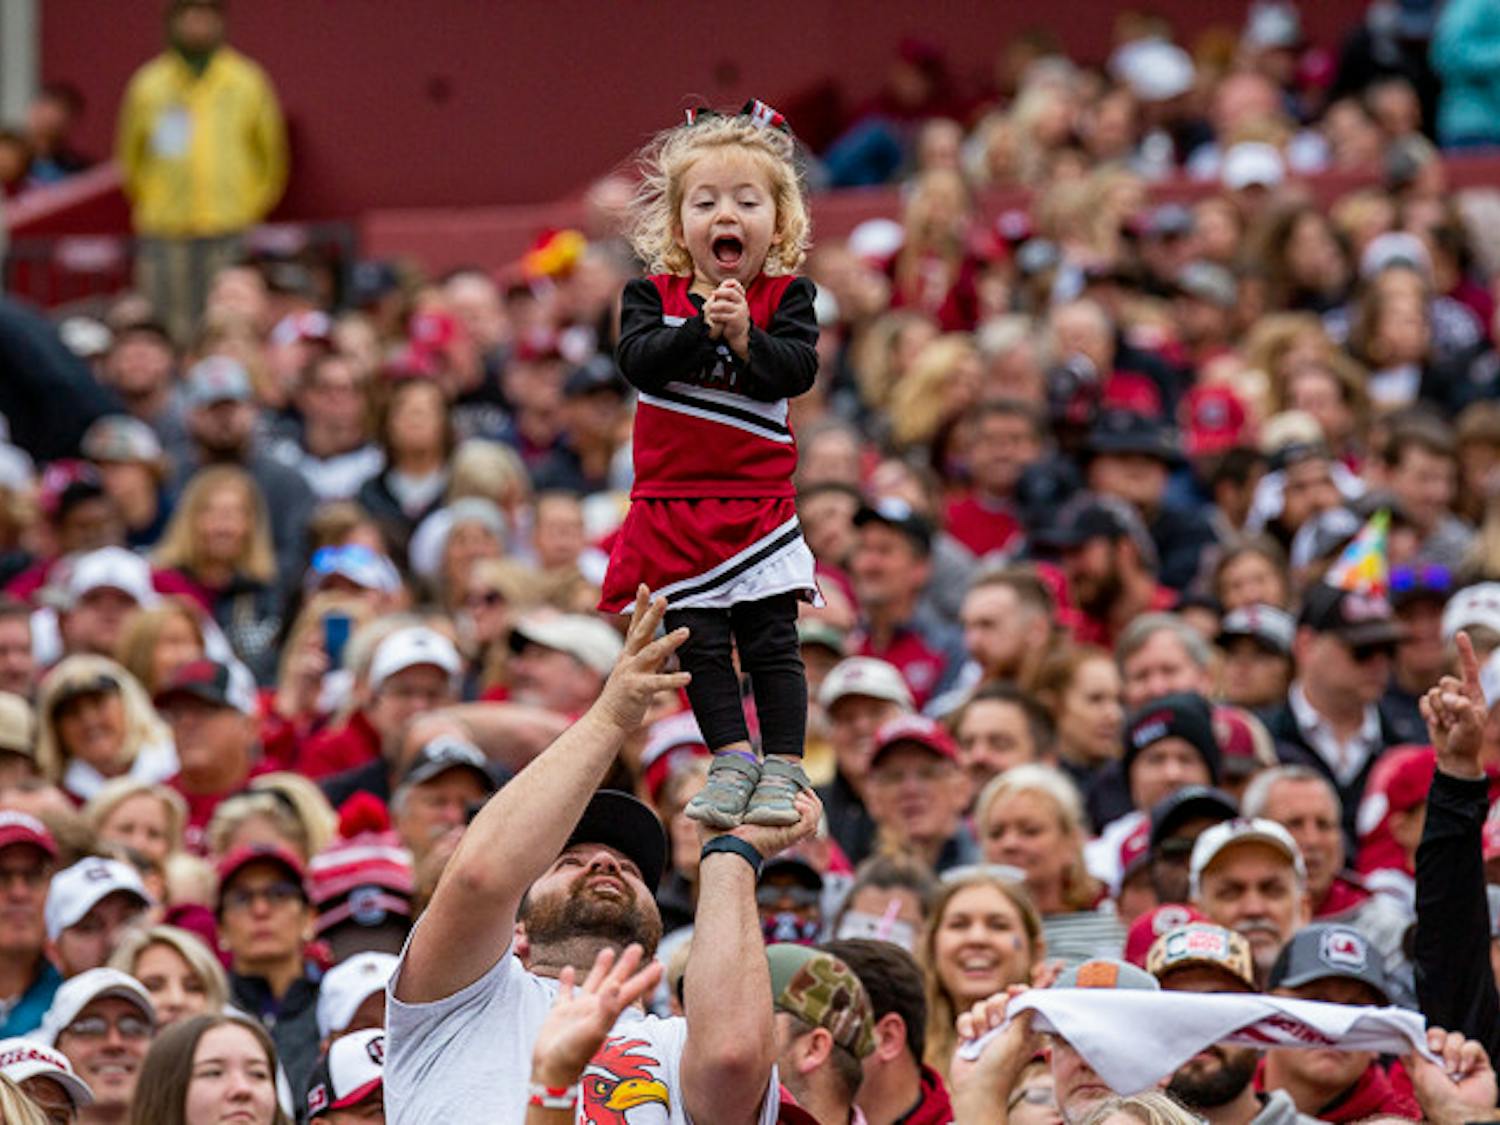 A child laughs with joy as her dad lifts her up at the South Carolina vs Missouri game on Oct. 29, 2022. The Tigers beat the Gamecocks 23-10.&nbsp;